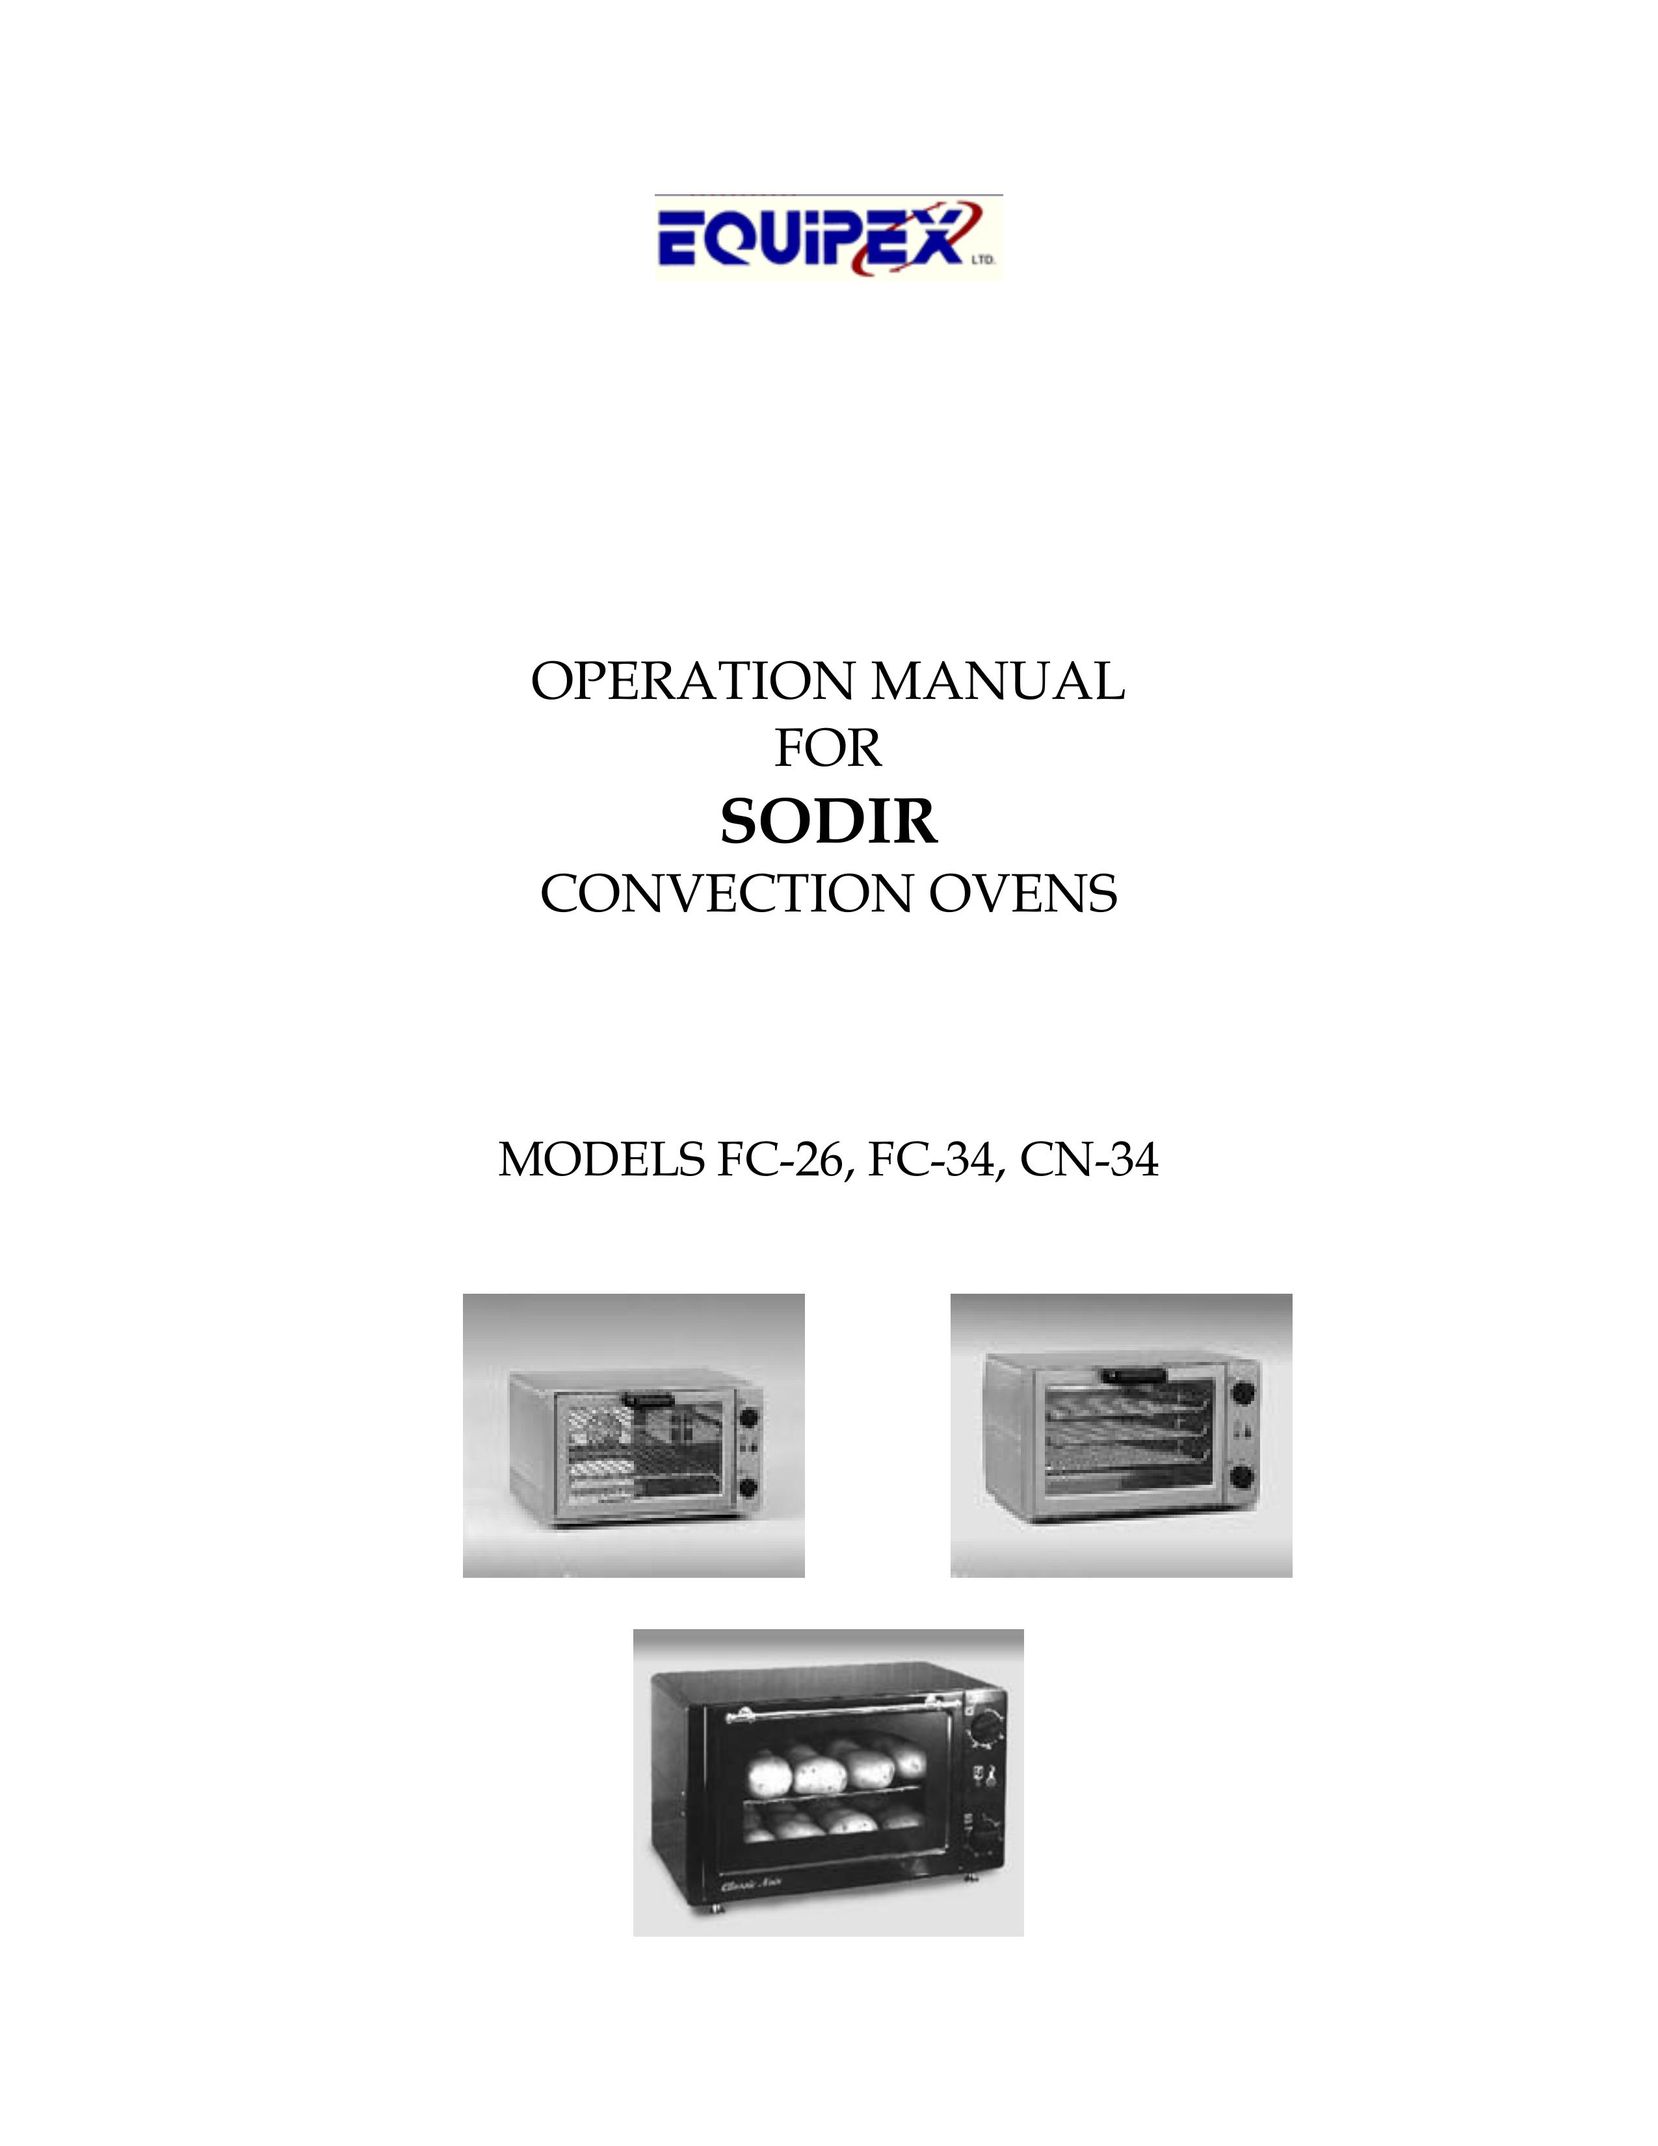 Equipex FC-34 Convection Oven User Manual